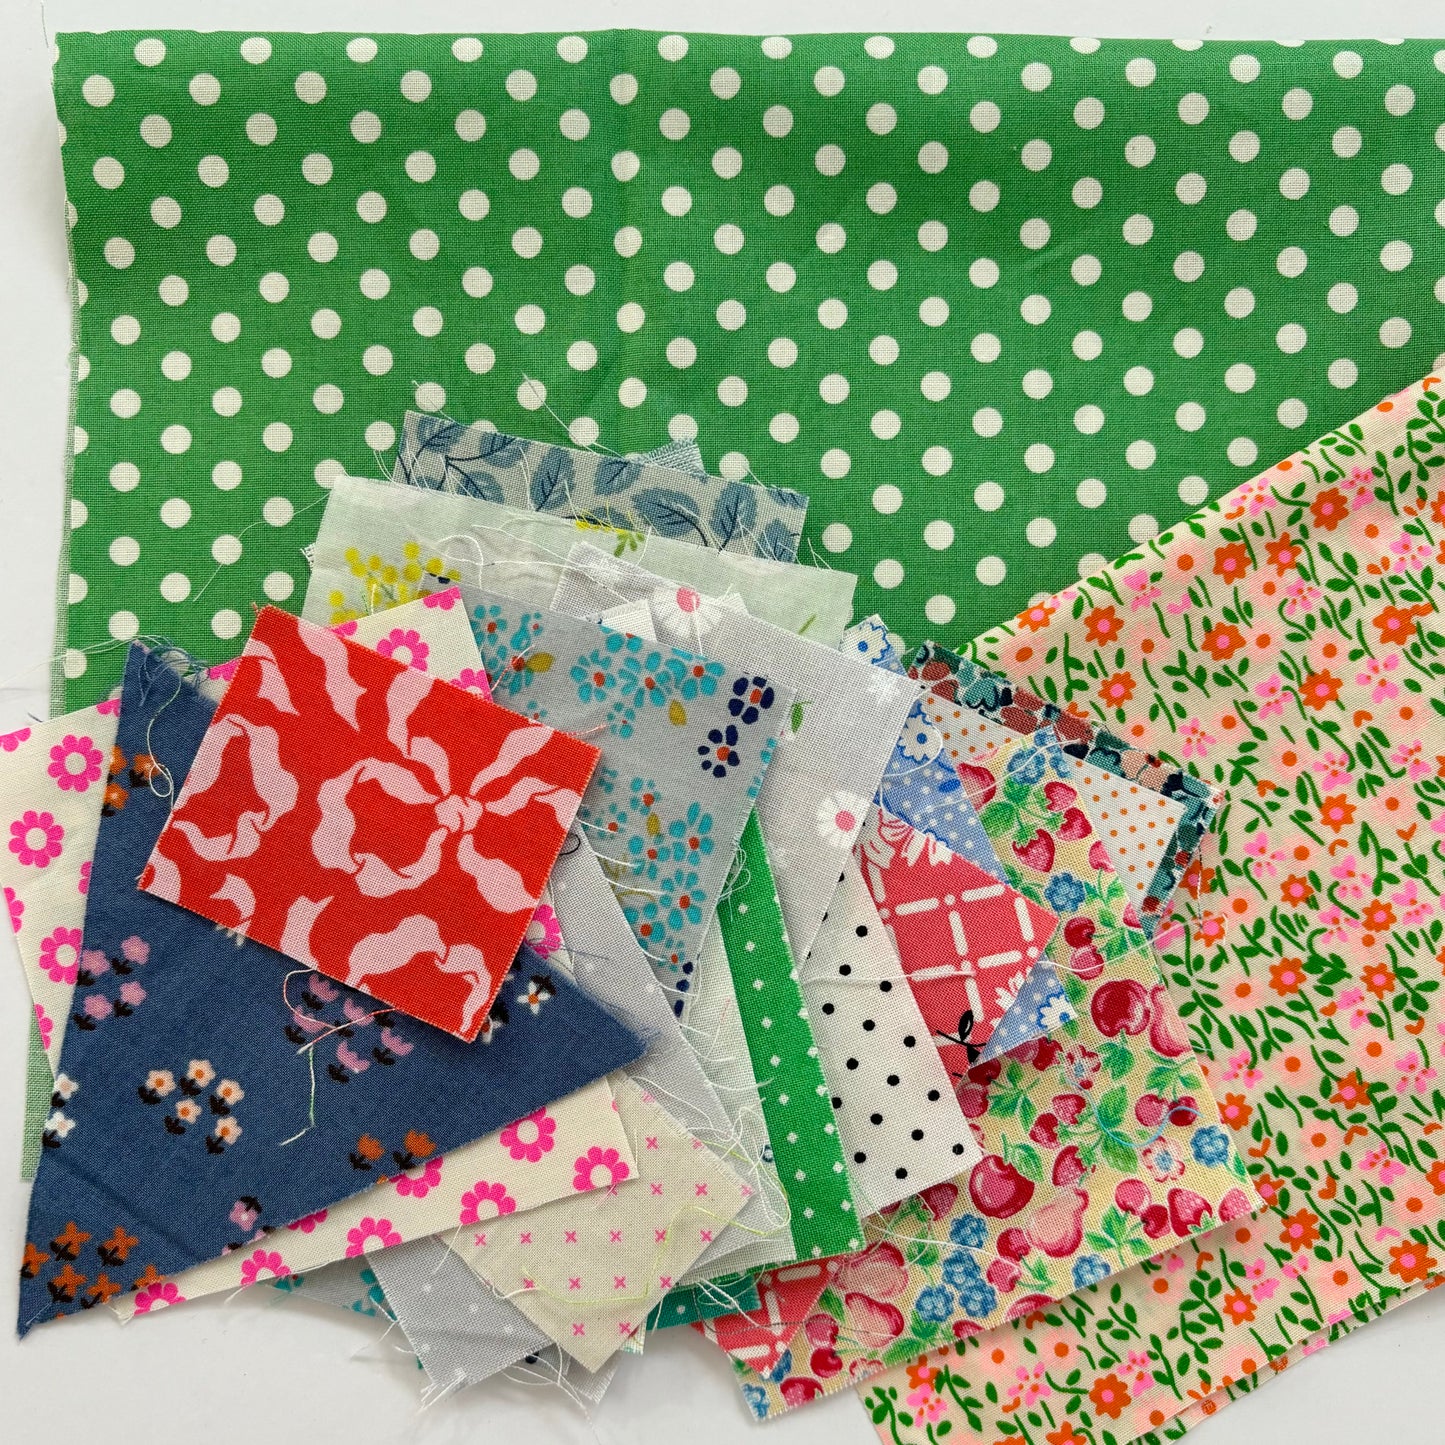 Little Fabric Packs for Scrappy Zipper Pouches from Bec’s Scrap Basket